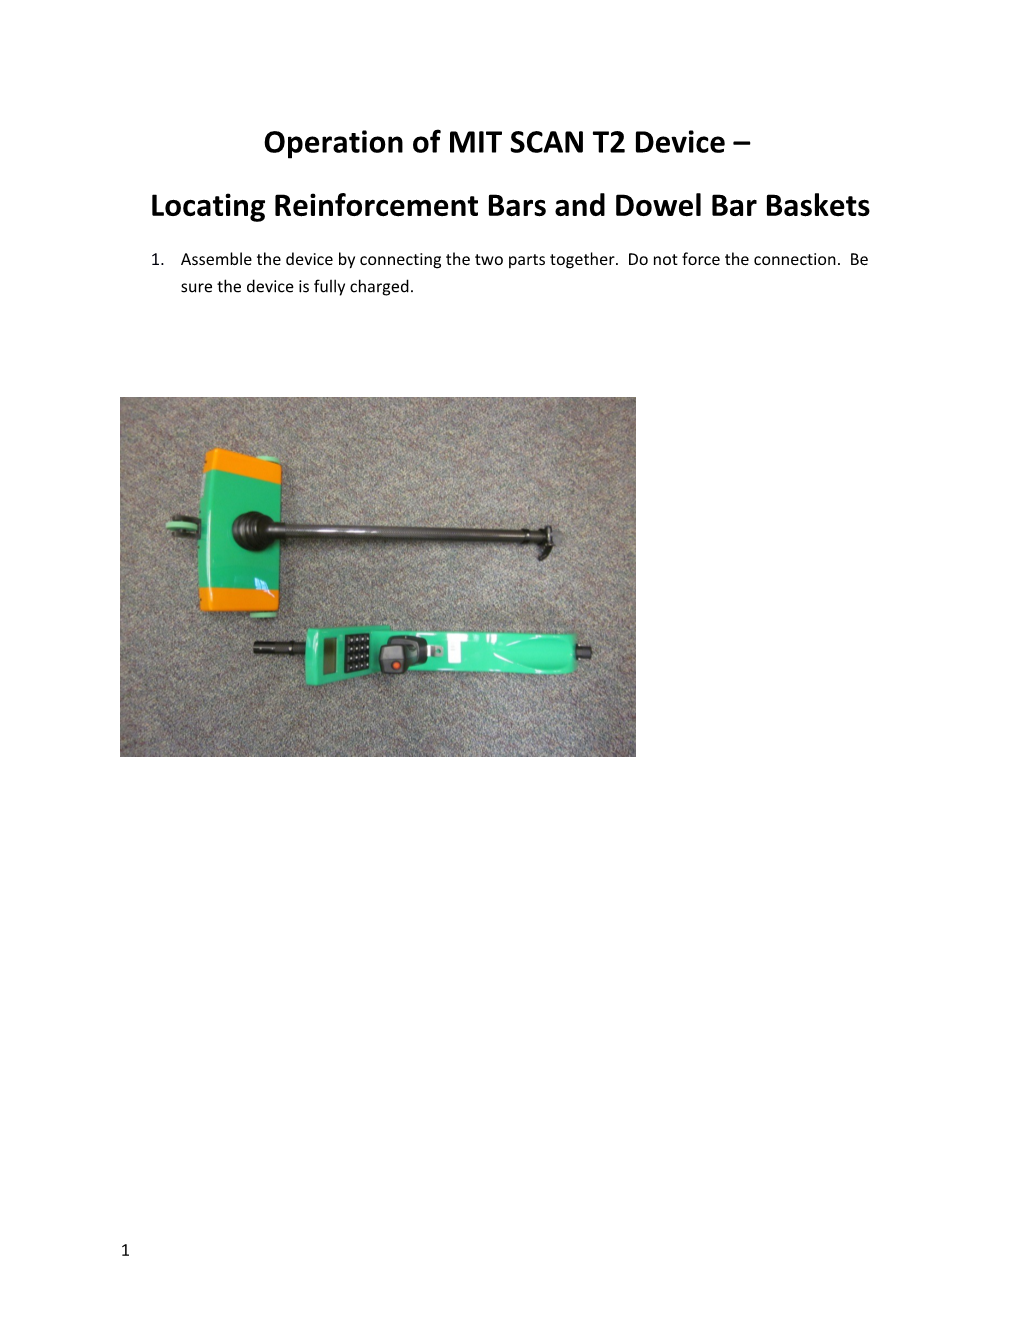 Locating Reinforcement Bars and Dowel Bar Baskets